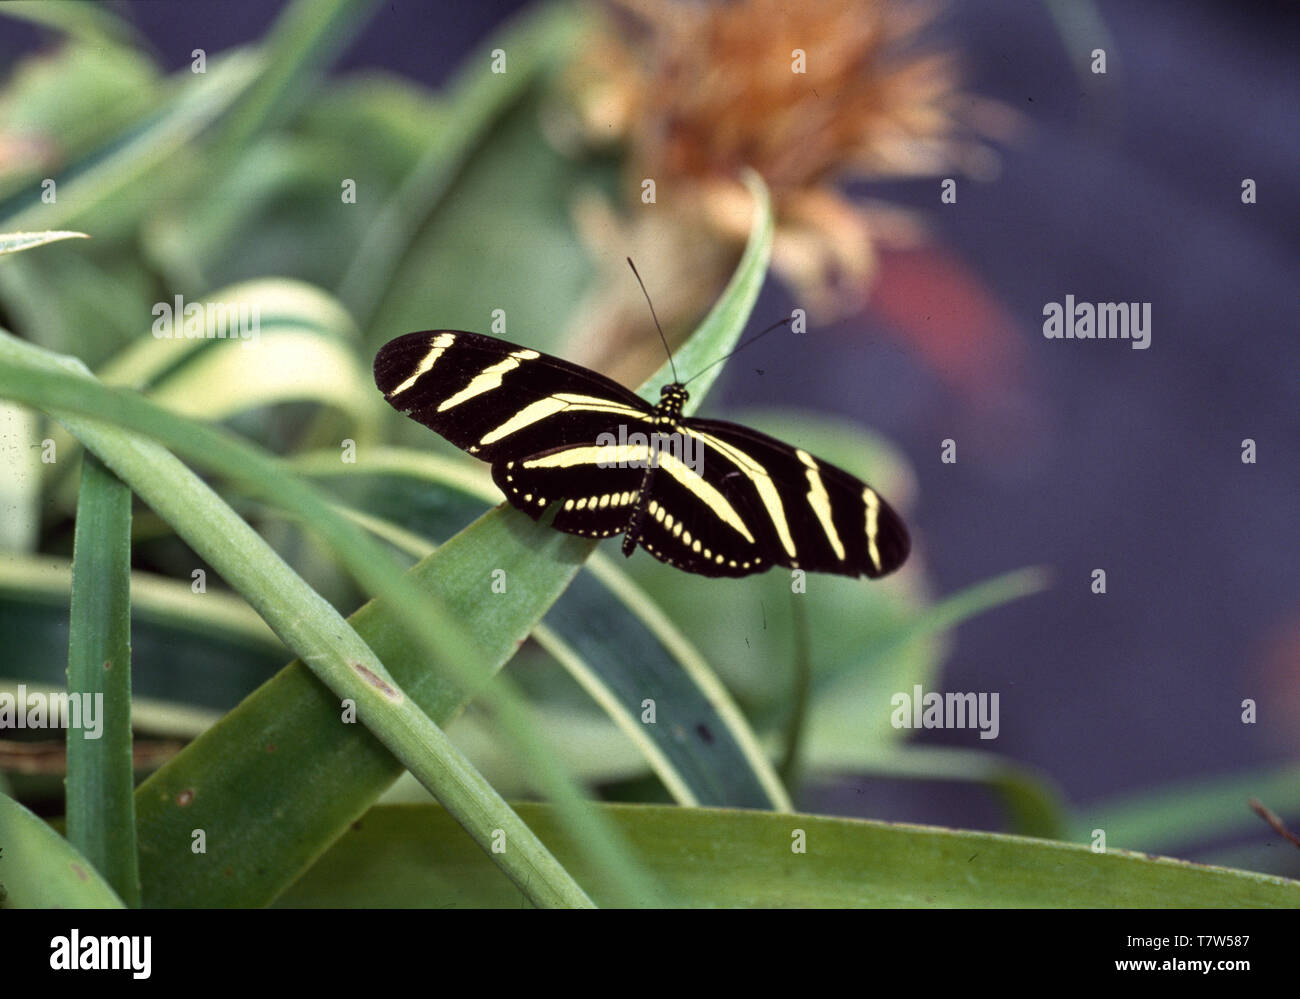 Close-up of a black+white butterfly on leaves Stock Photo